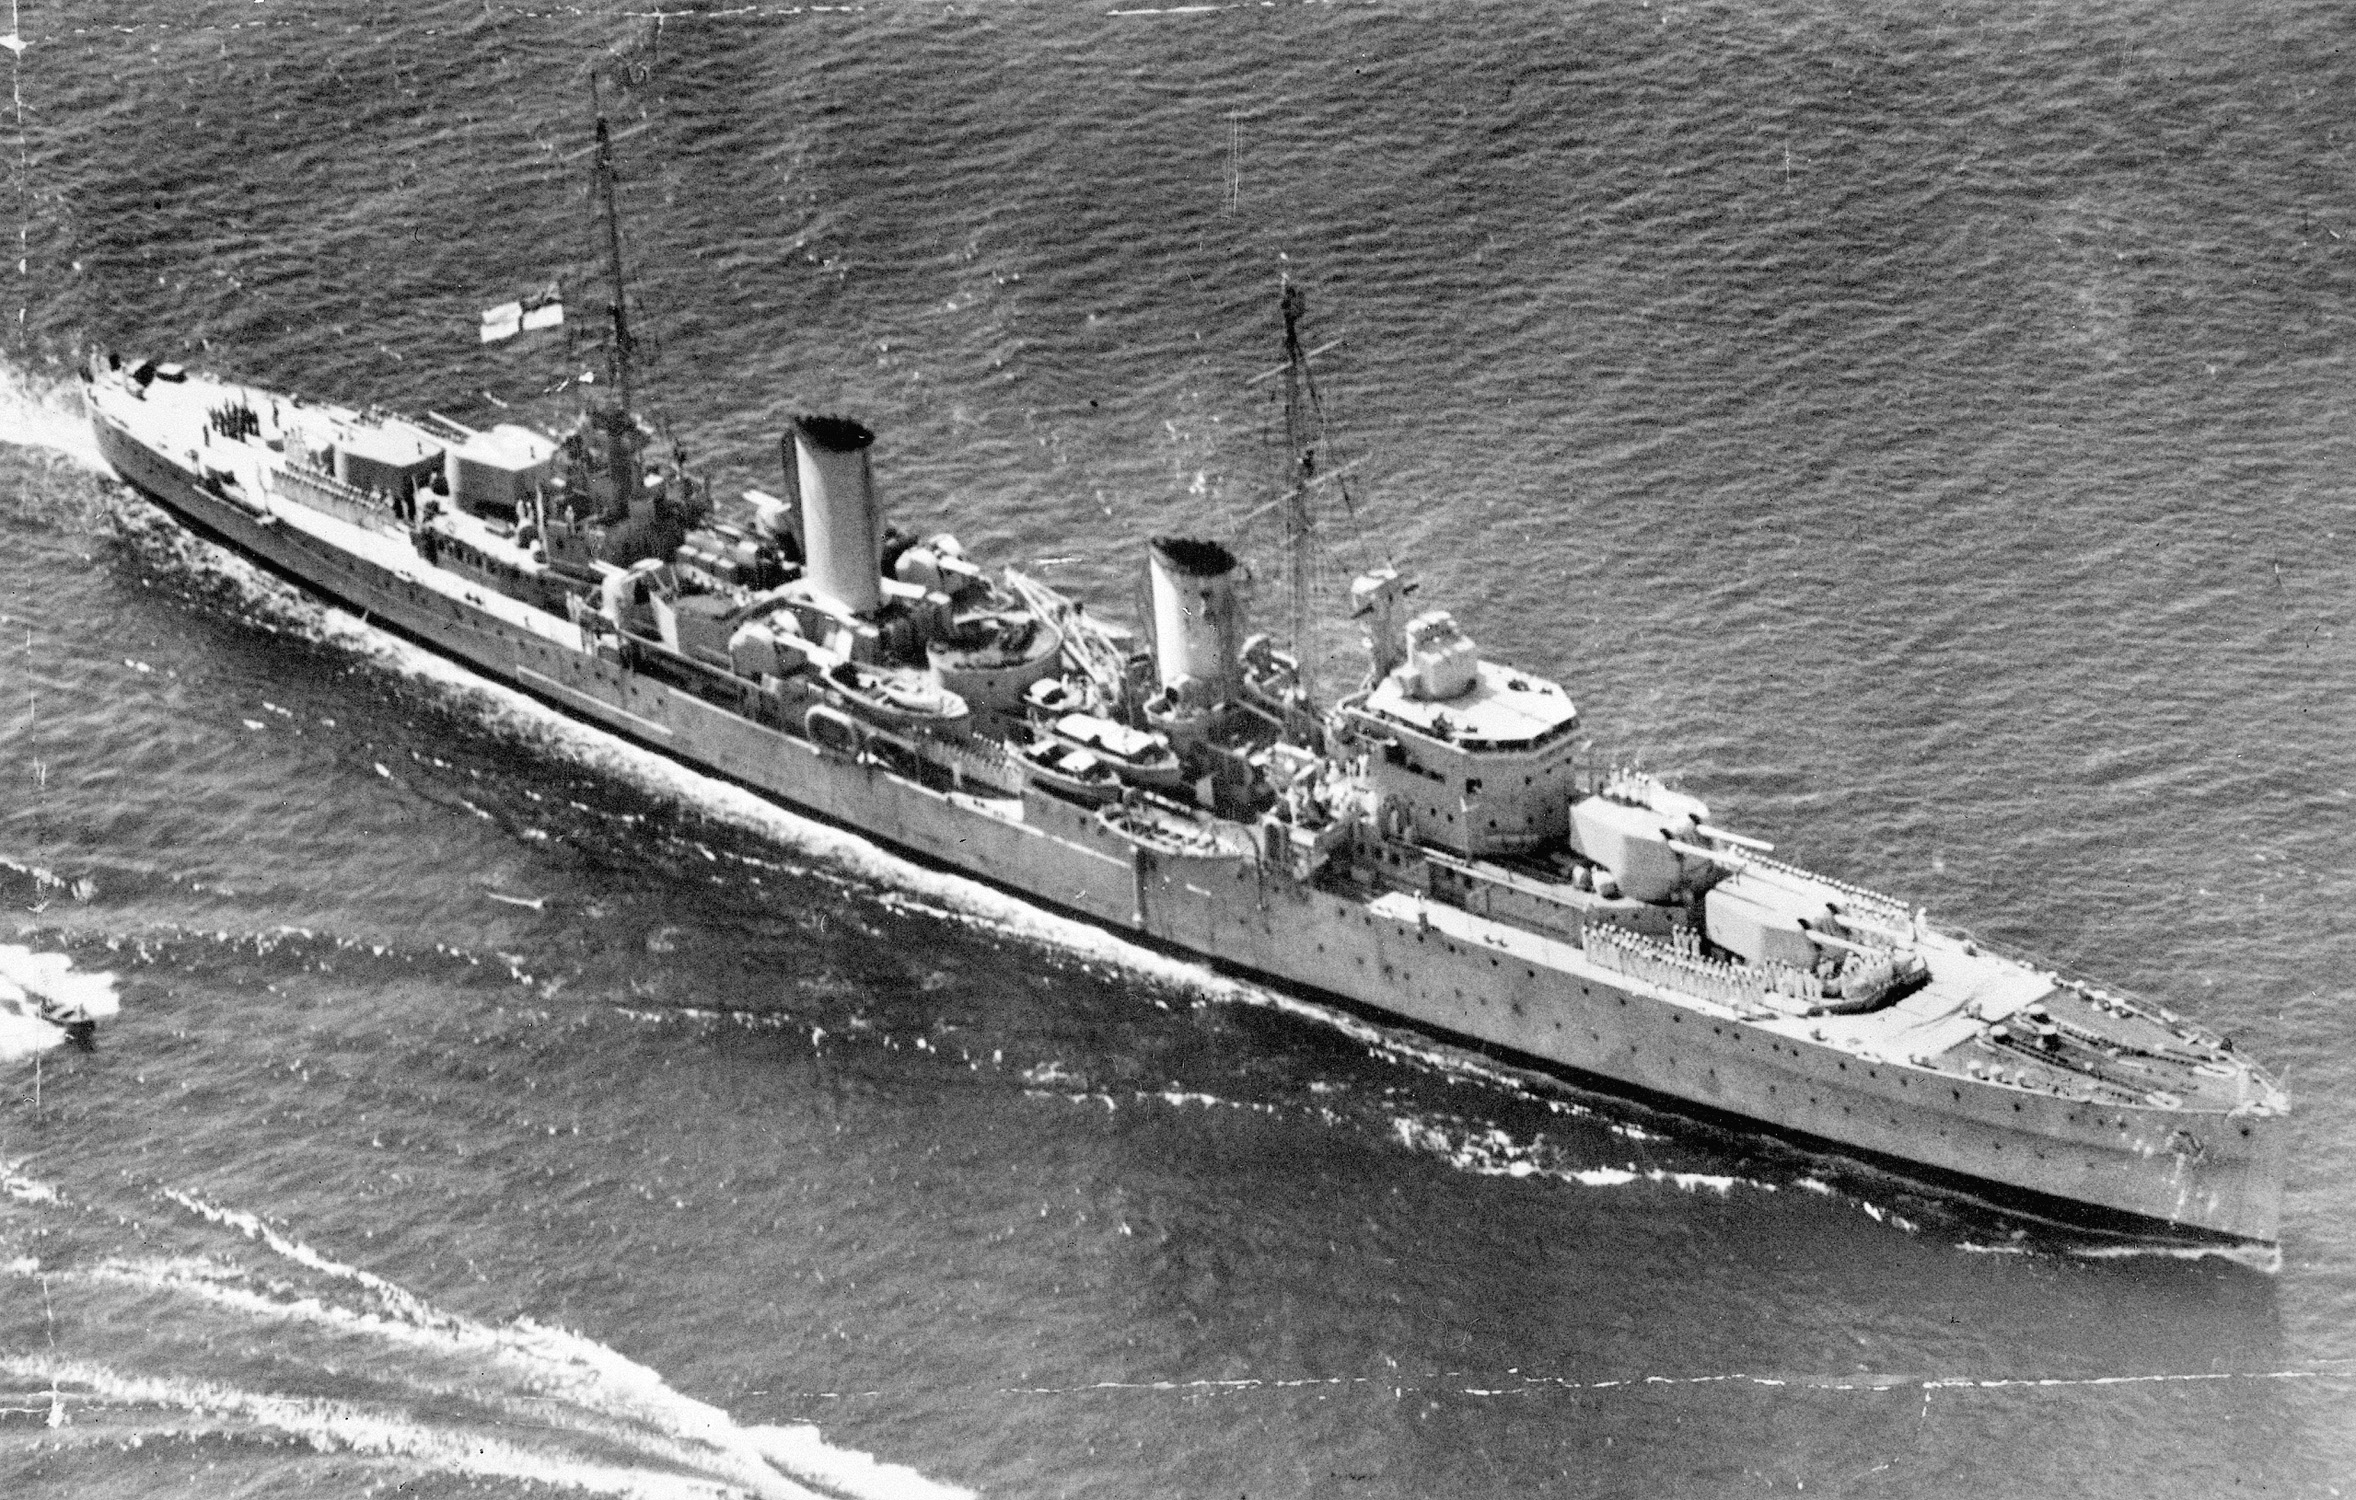 In a 1940 aerial view, HMAS Perth is shown underway. The fire director for the main armament may be seen behind the bridge, while the high angle control position for the 4-inch main batteries is above.  Searchlights flank the fore funnel. The eight 4-inch Mark XVI guns are grouped in twin Mark XIX mounts. 